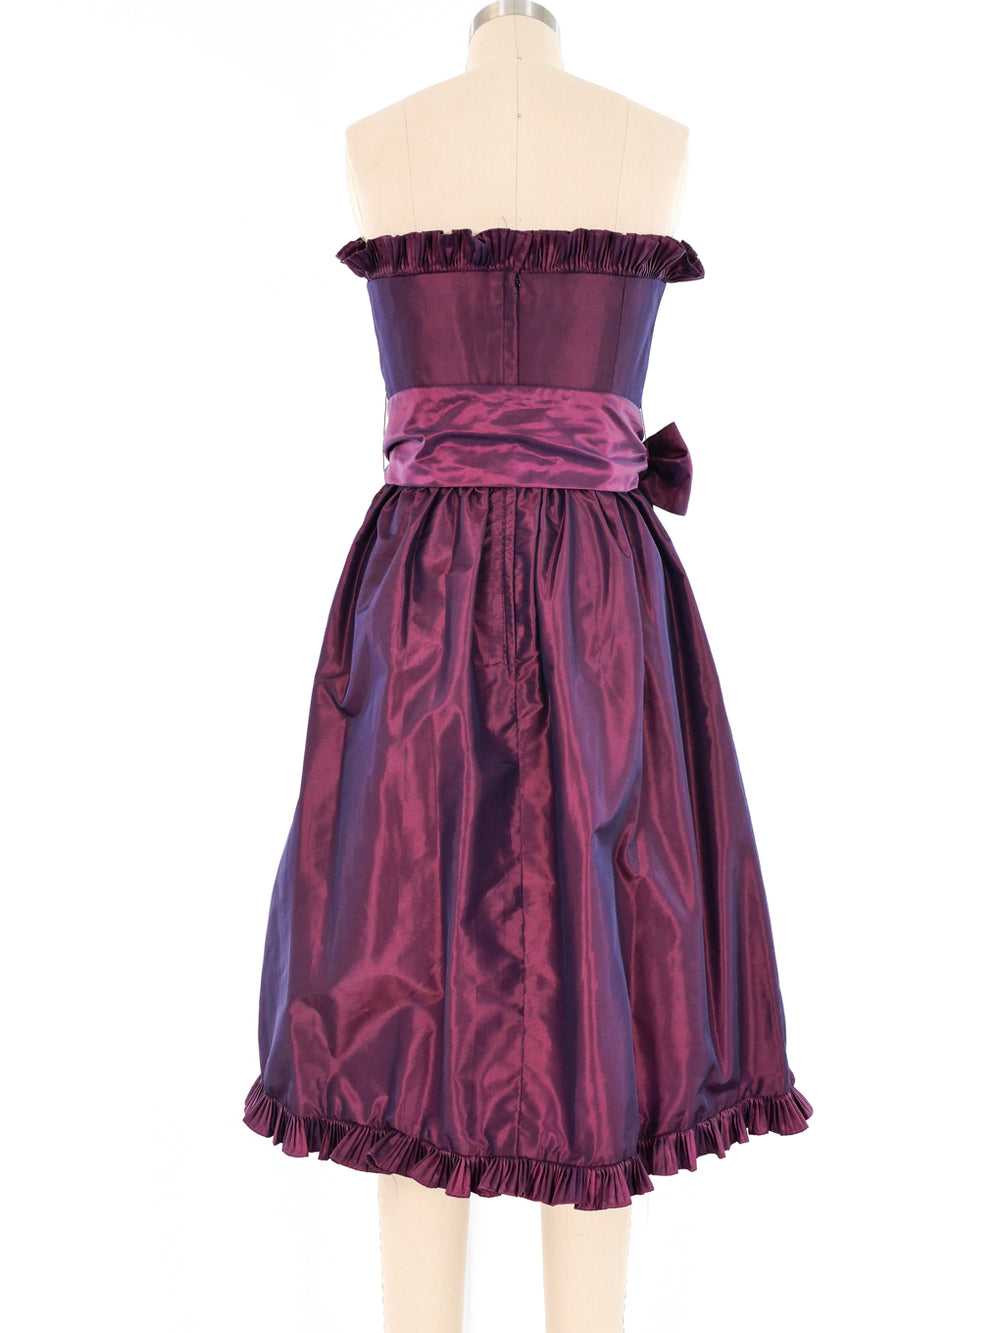 Victor Costa Ruffled Strapless Cocktail Dress - image 4